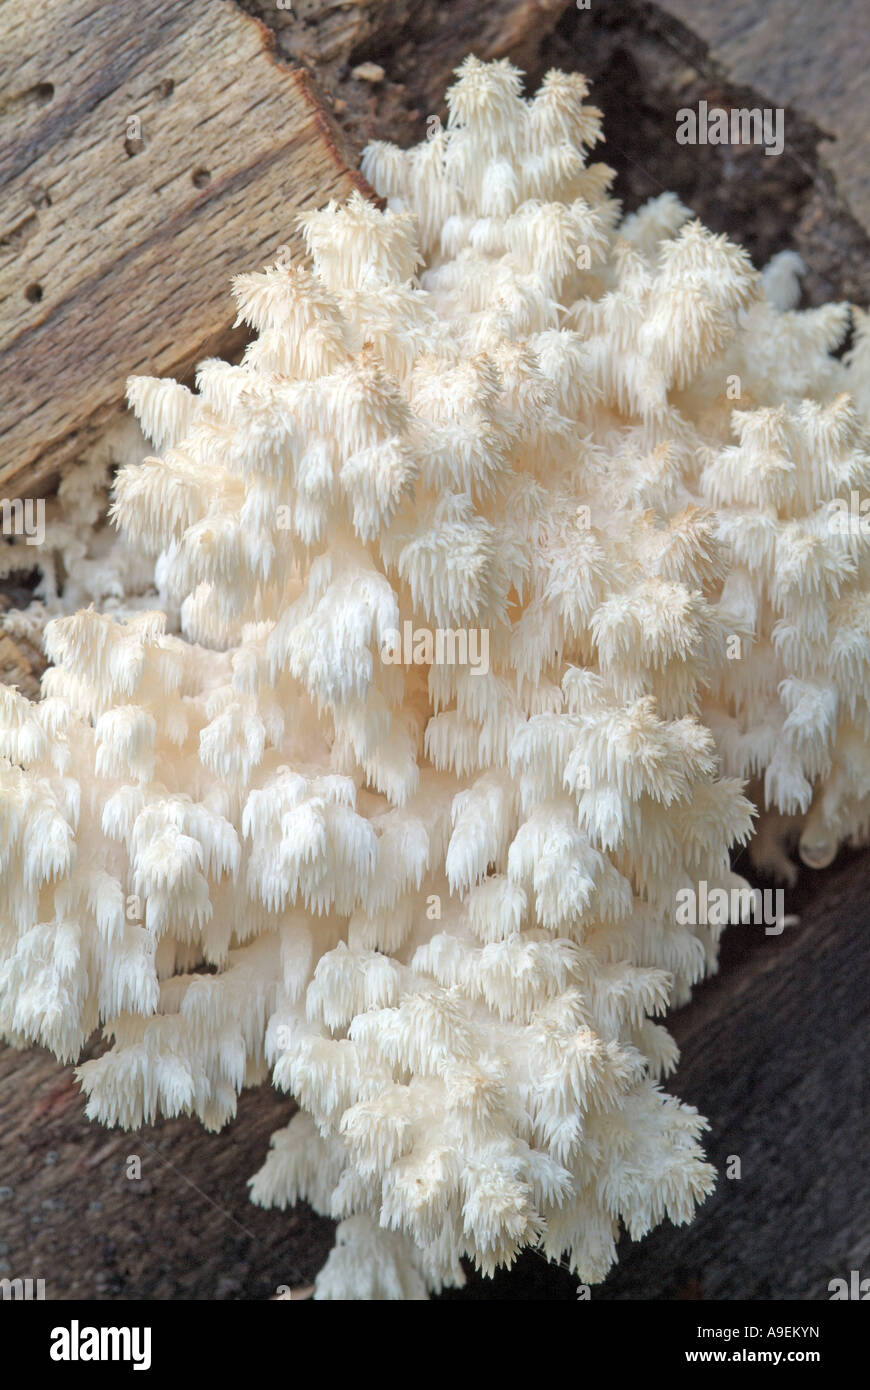 Coral Tooth (Hericium coralloides) Stock Photo